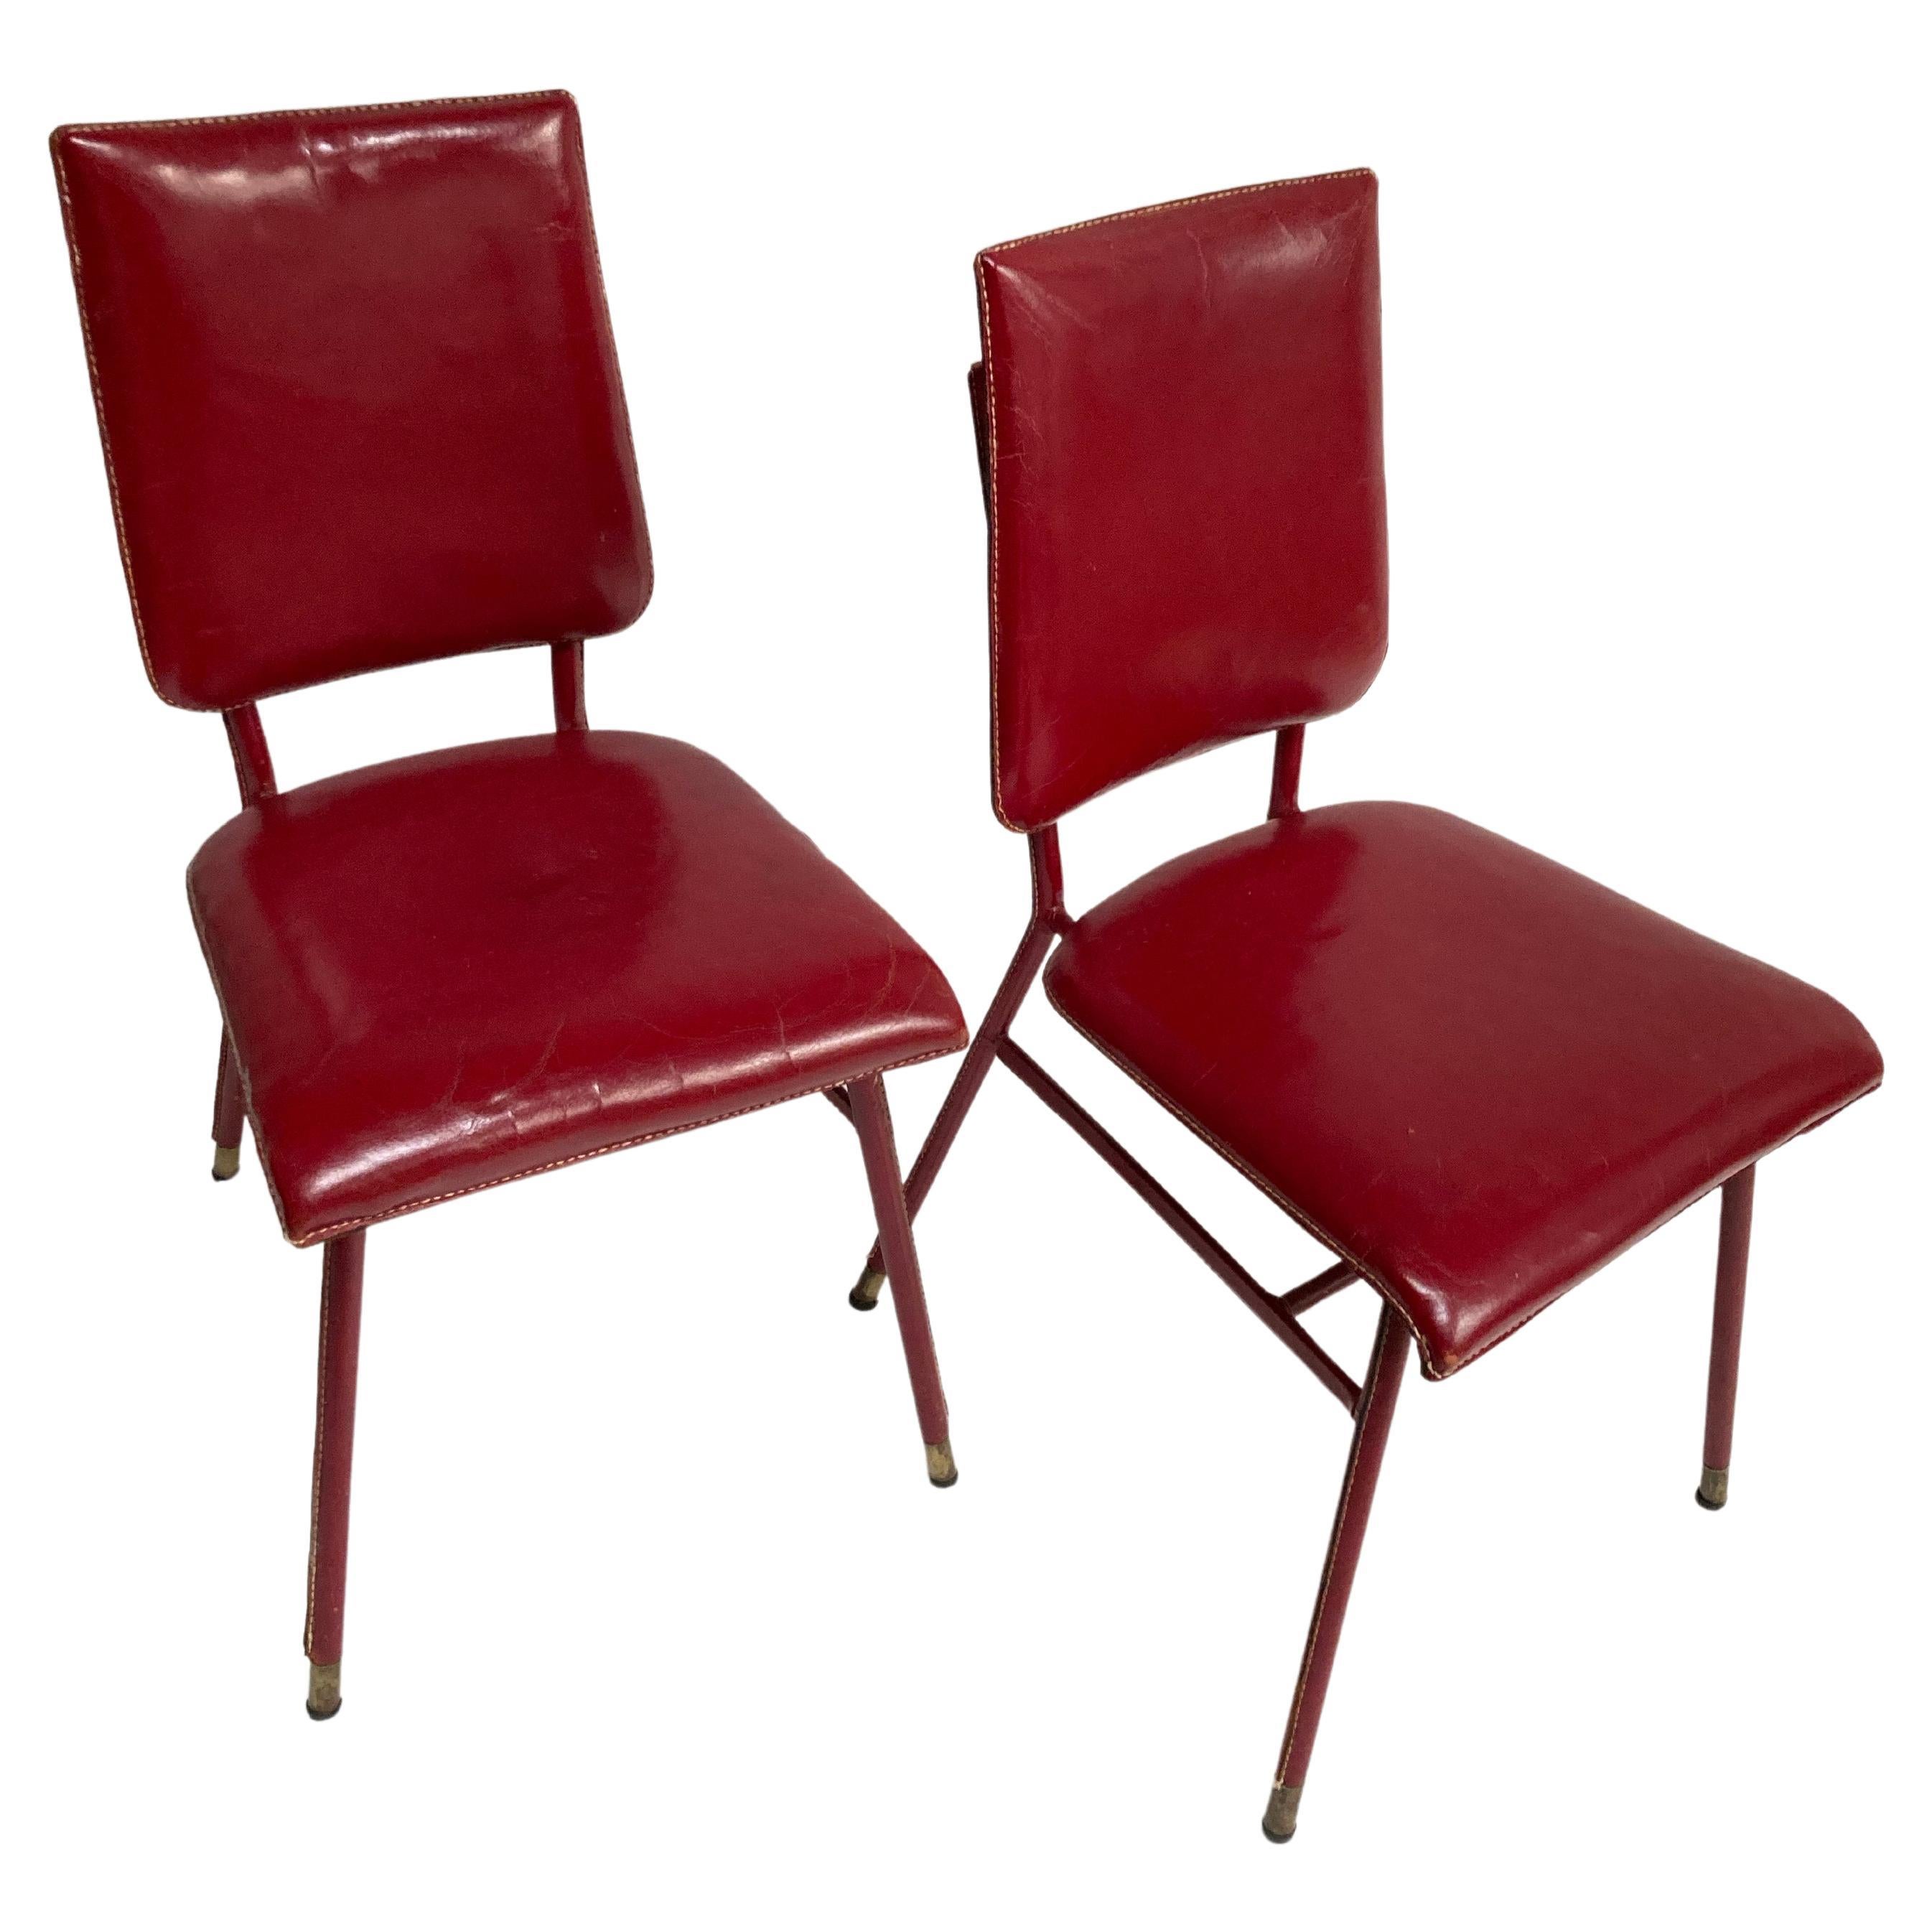 Pair of 1950's Red Stitched Leather Chairs by Jacques Adnet